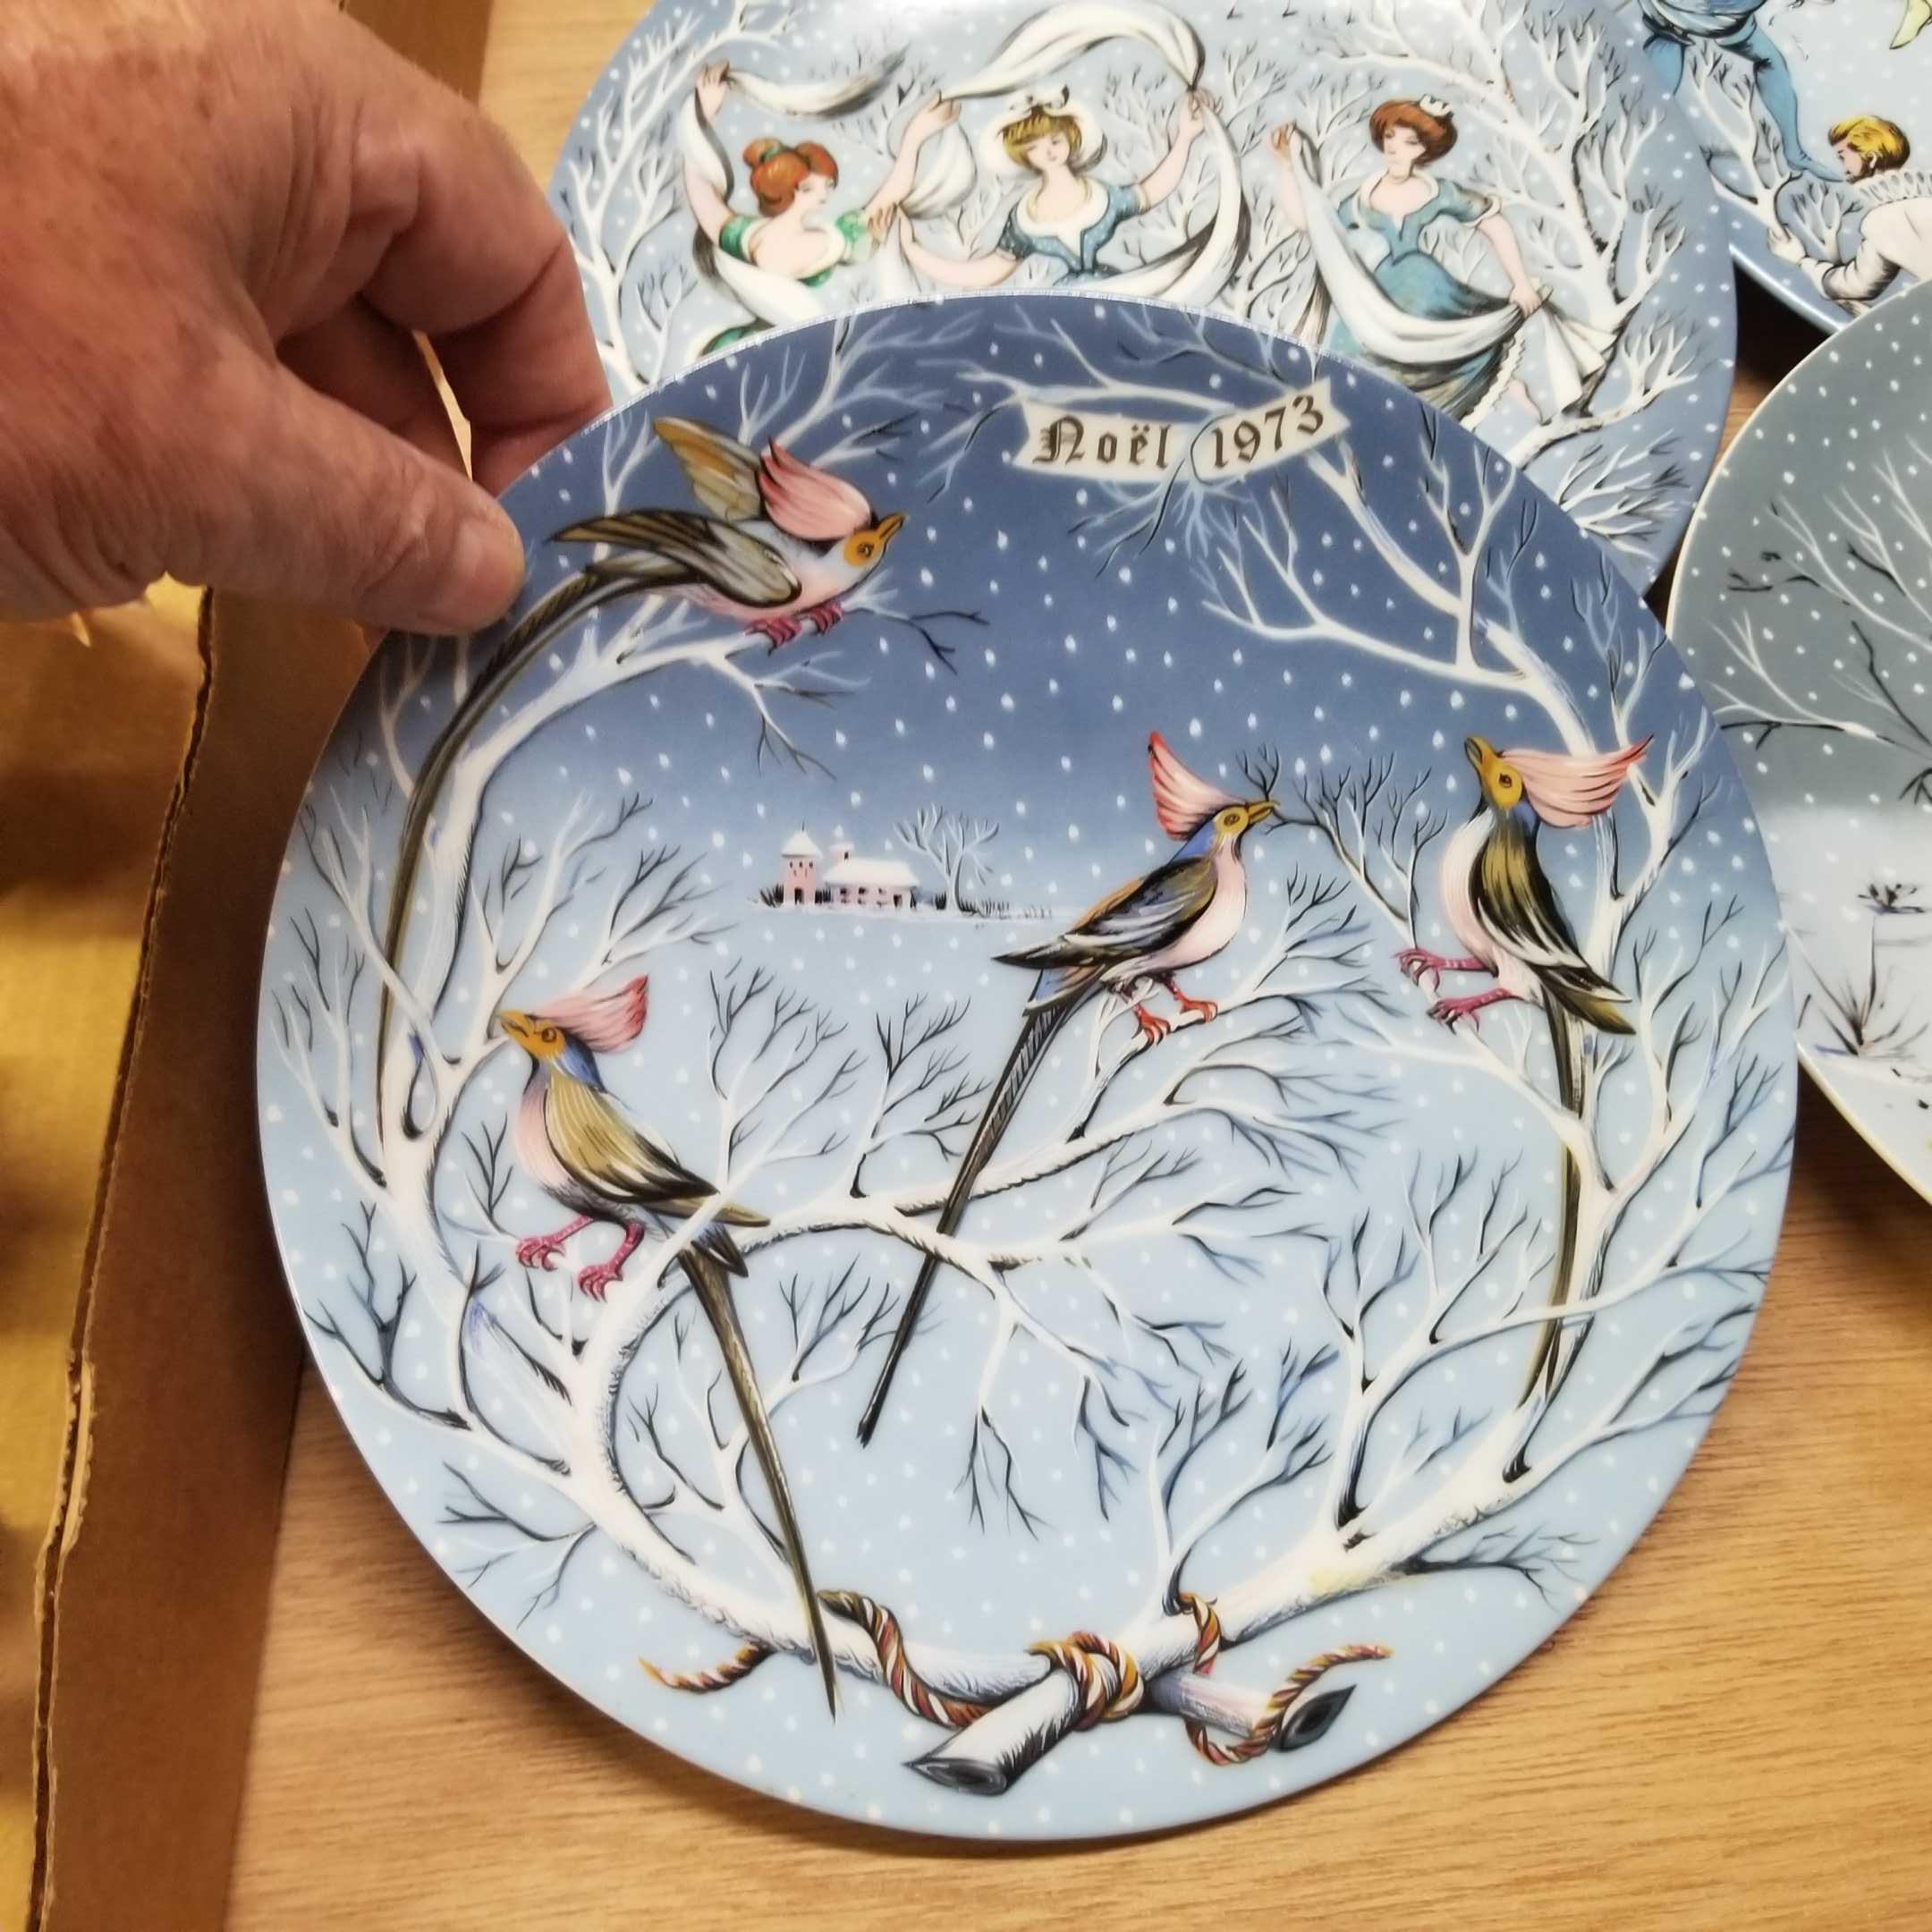 HAVILAND "12 DAYS of CHRISTMAS" COLLECTOR PLATES